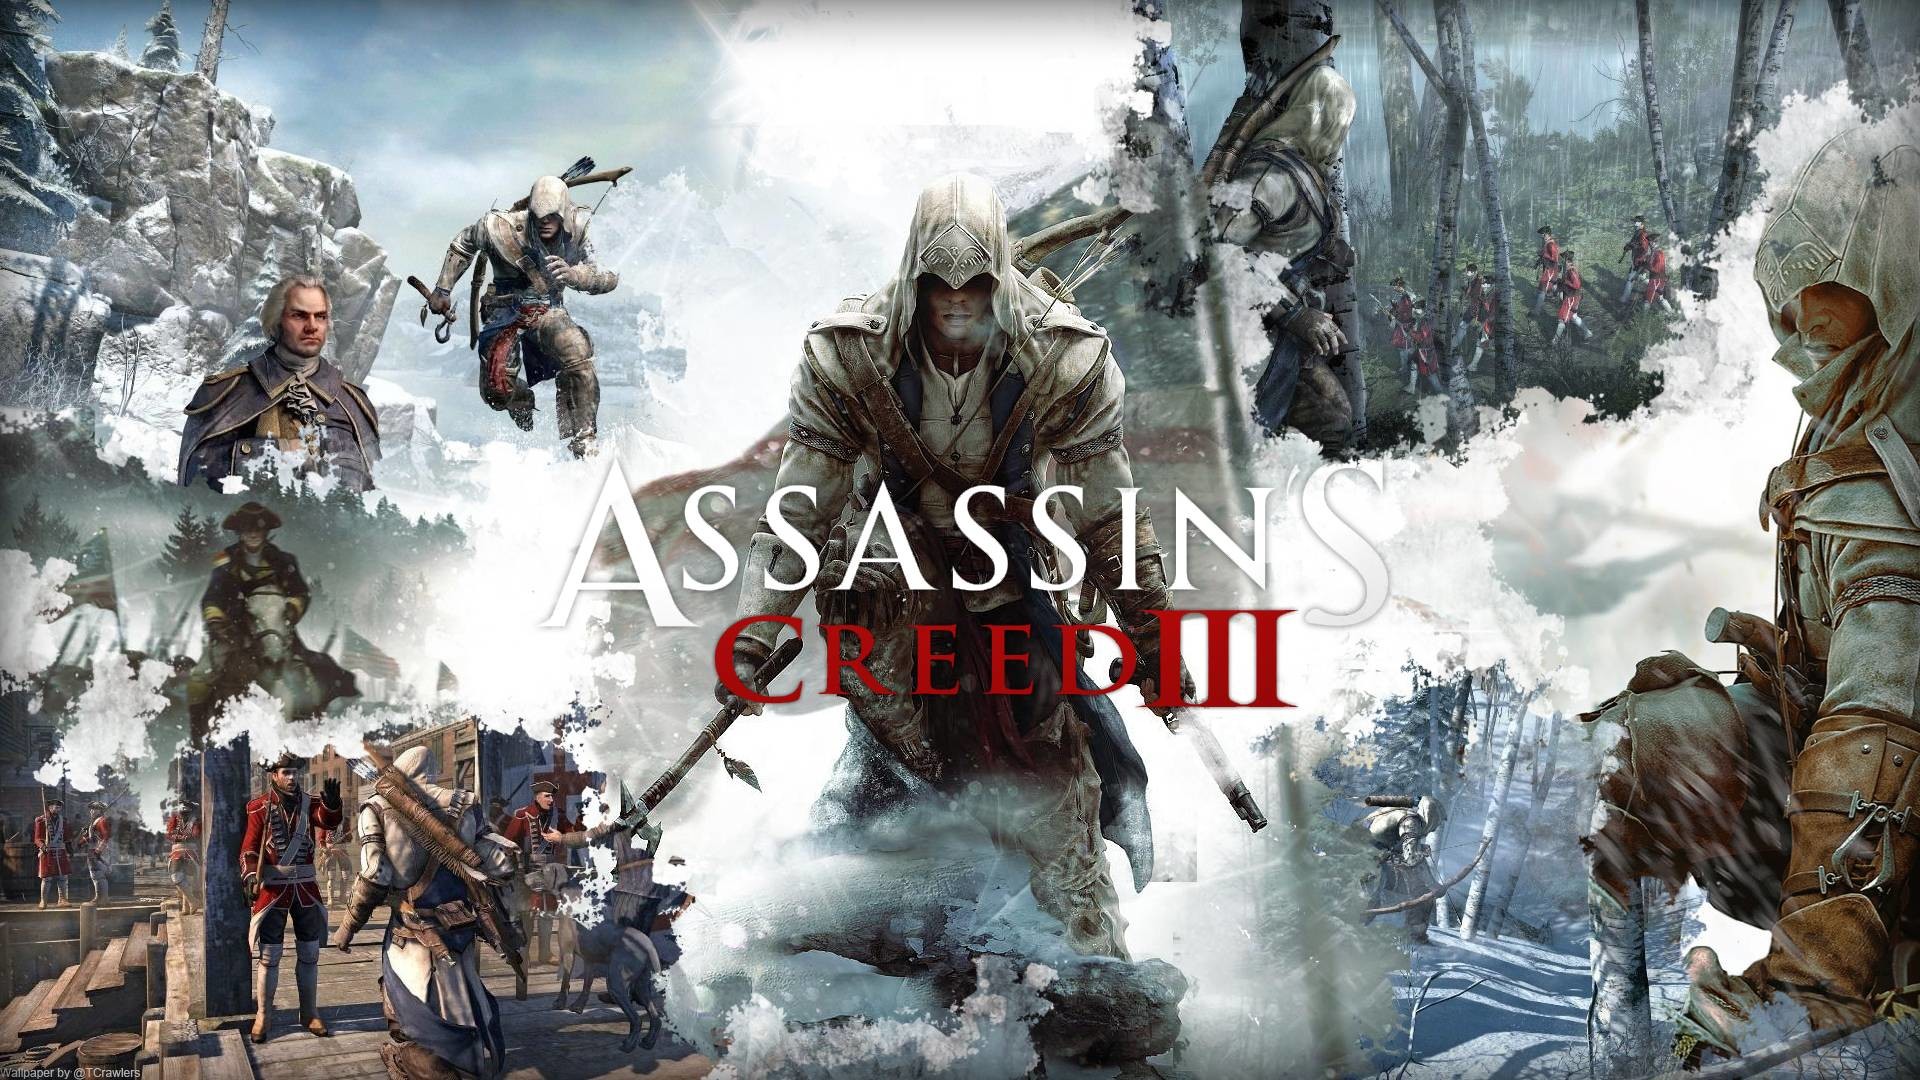 1920x1080 Assassins Creed 3 Wallpapers